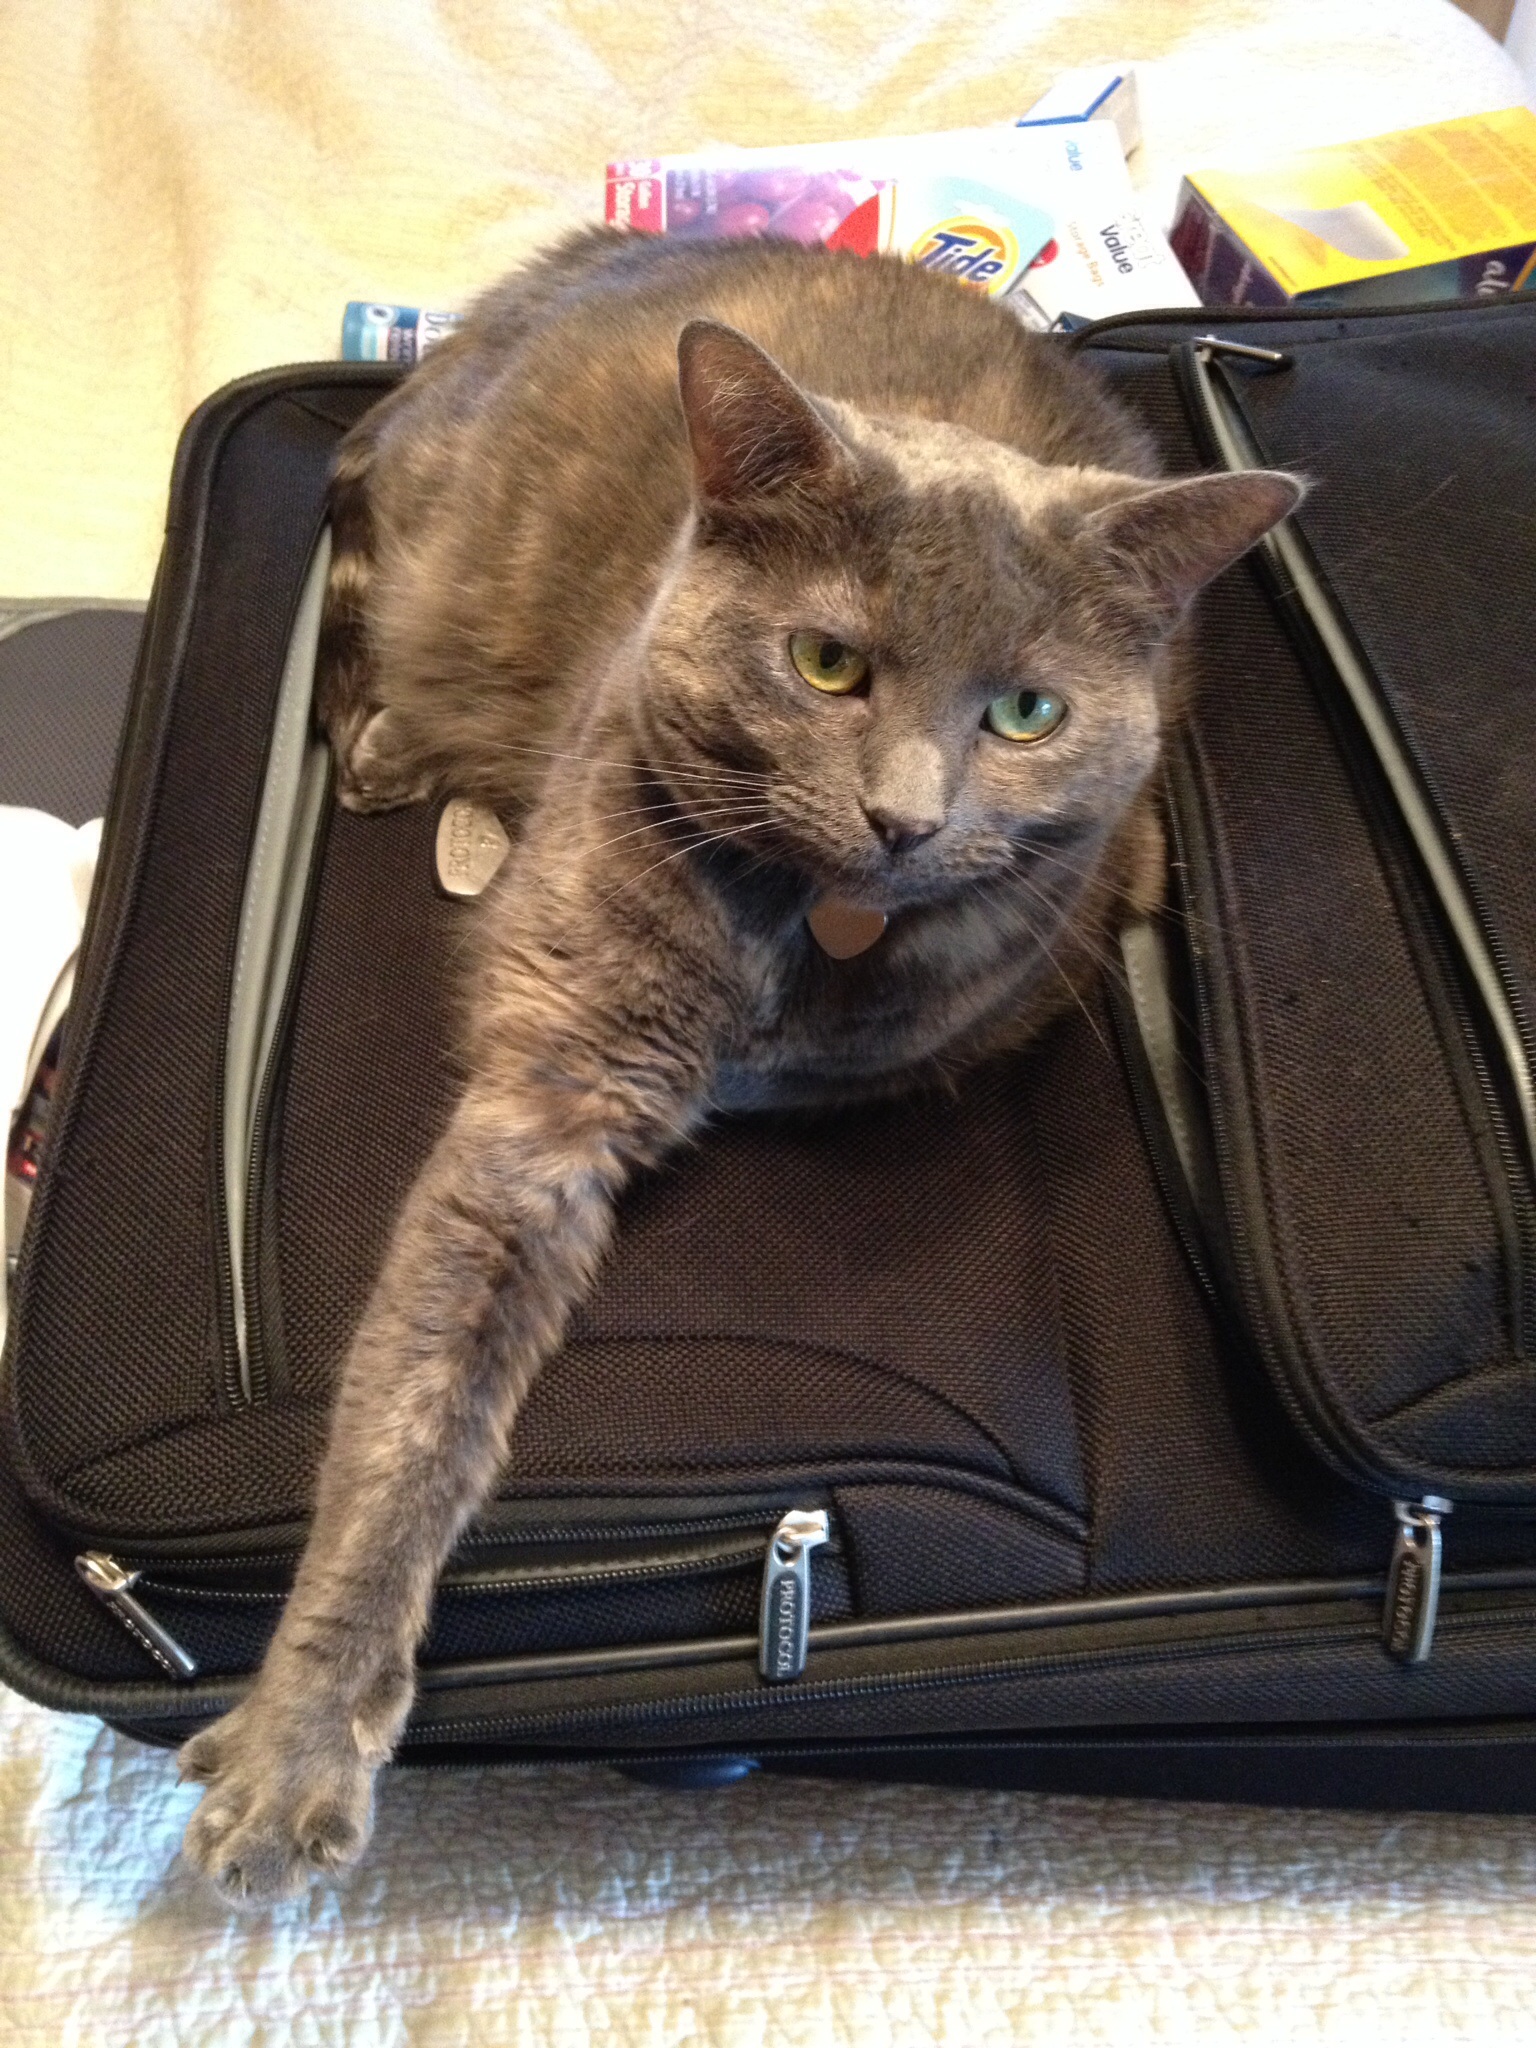 Dixie finds sleeping on the luggage to be a comfy spot